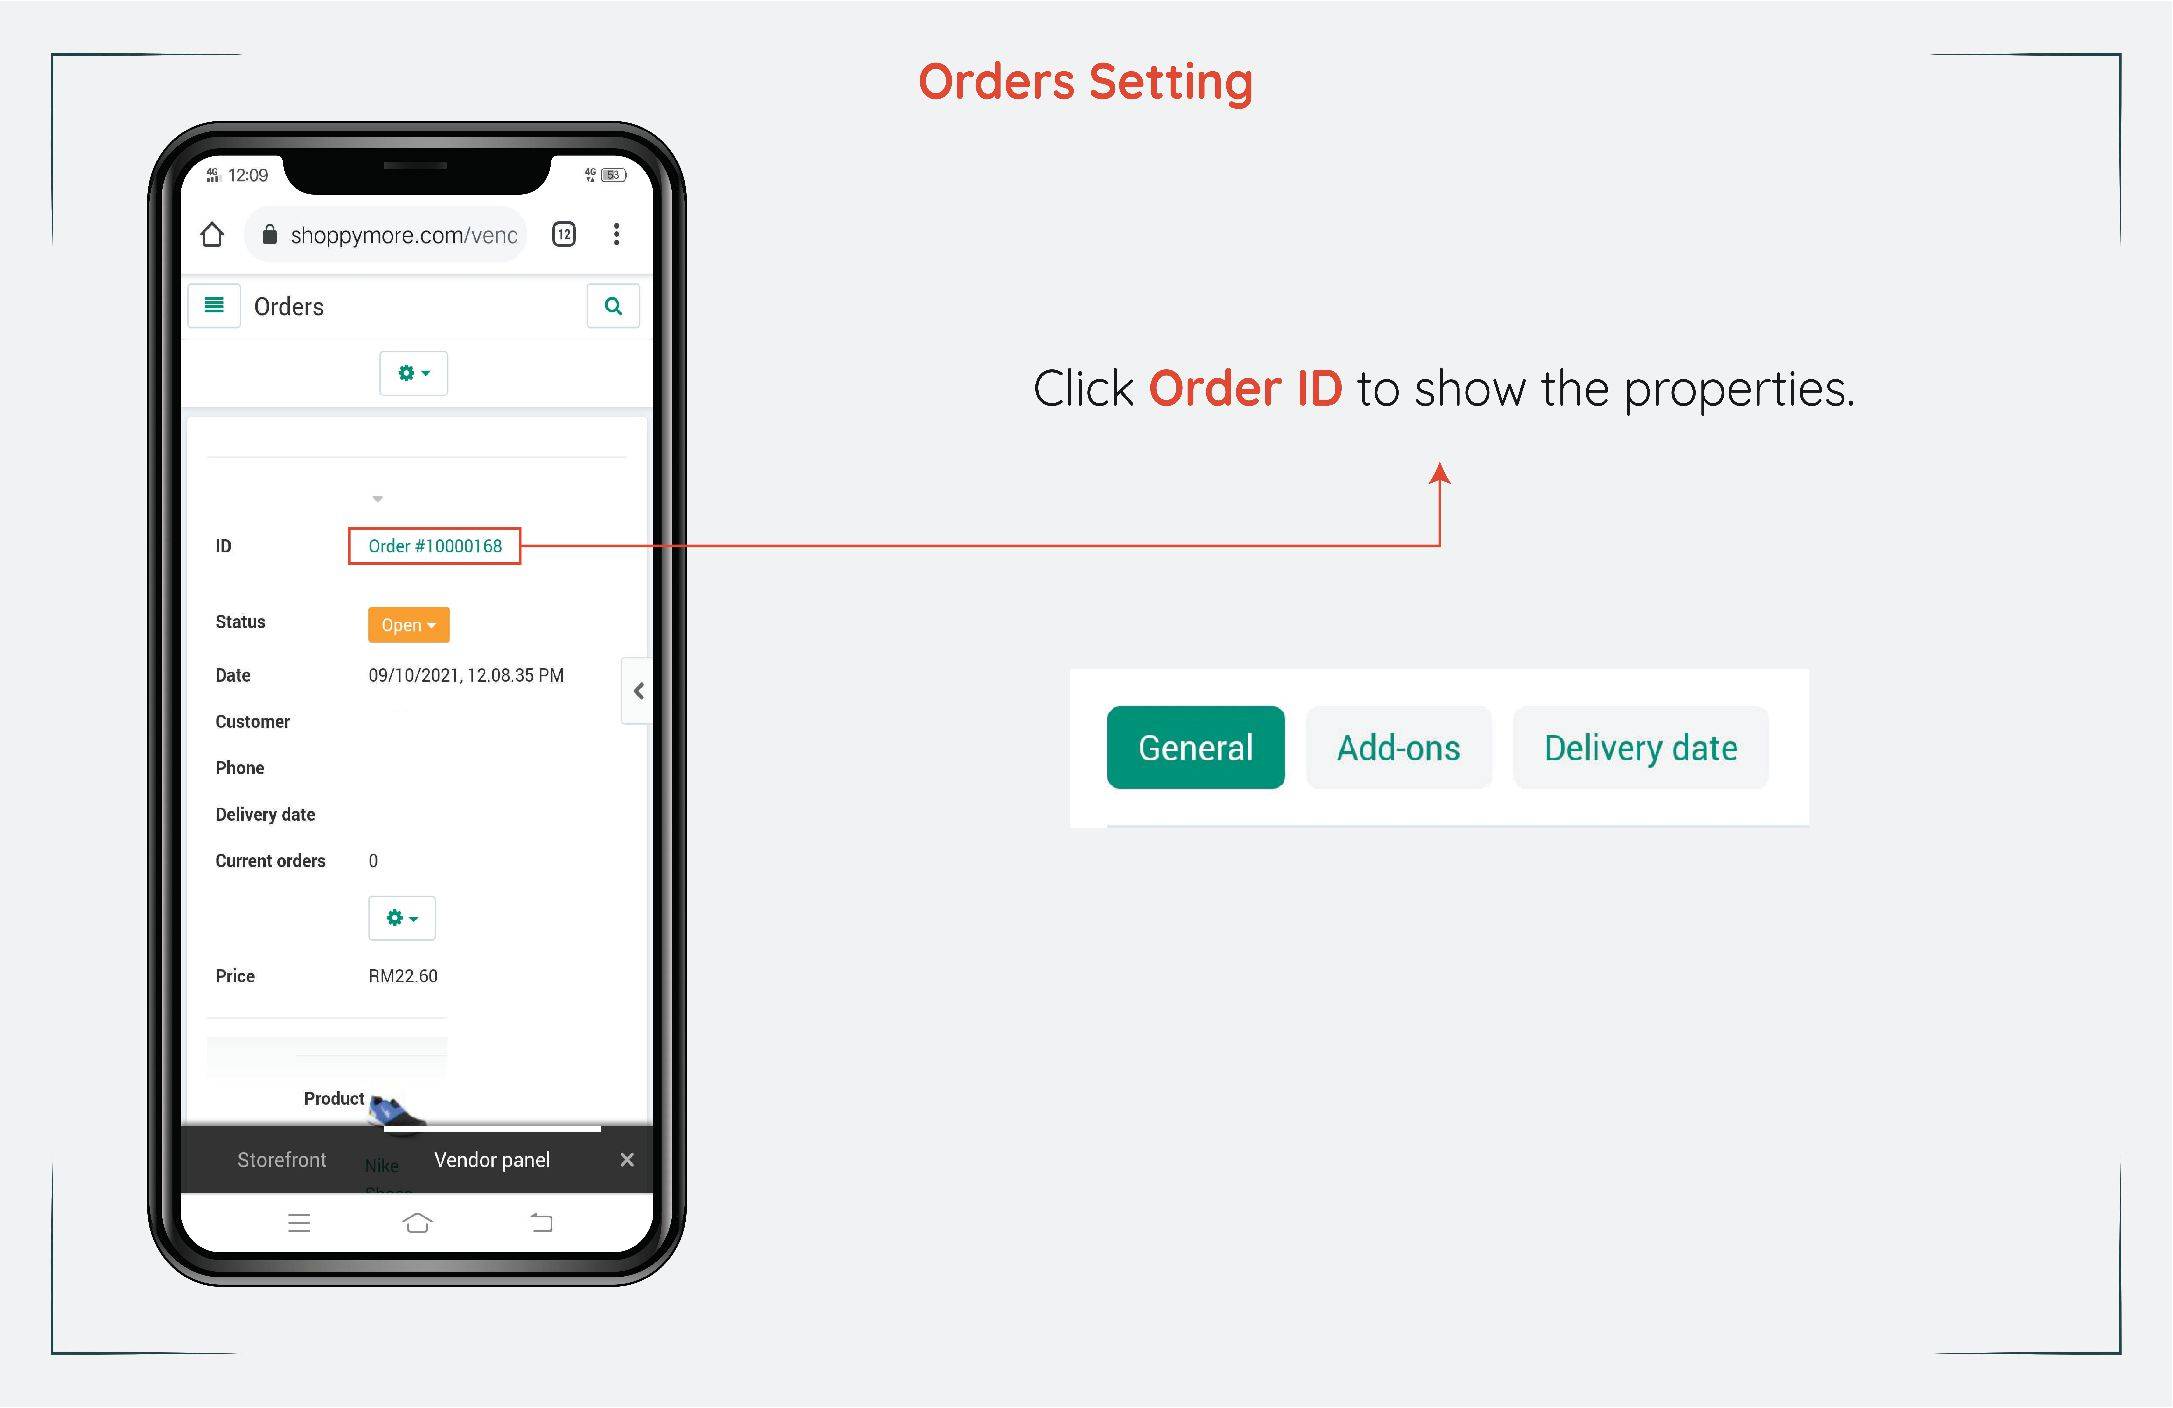 How to use Easy Parcel order handling using mobile 3